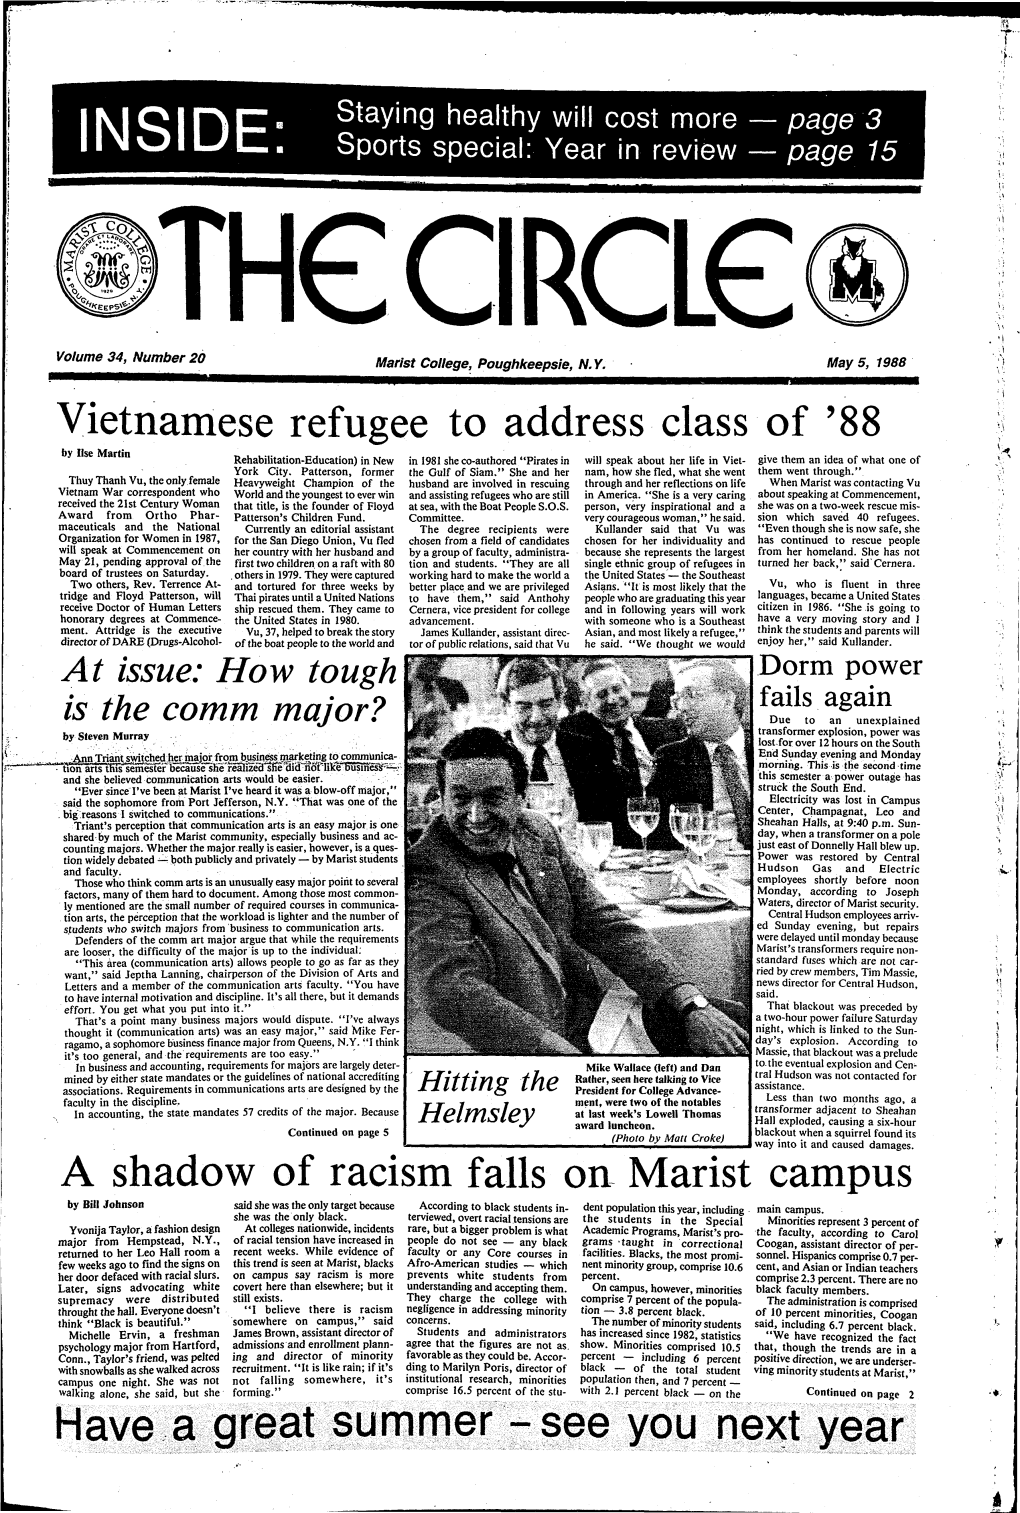 88 a Shadow of Racism Falls on Marist Campus